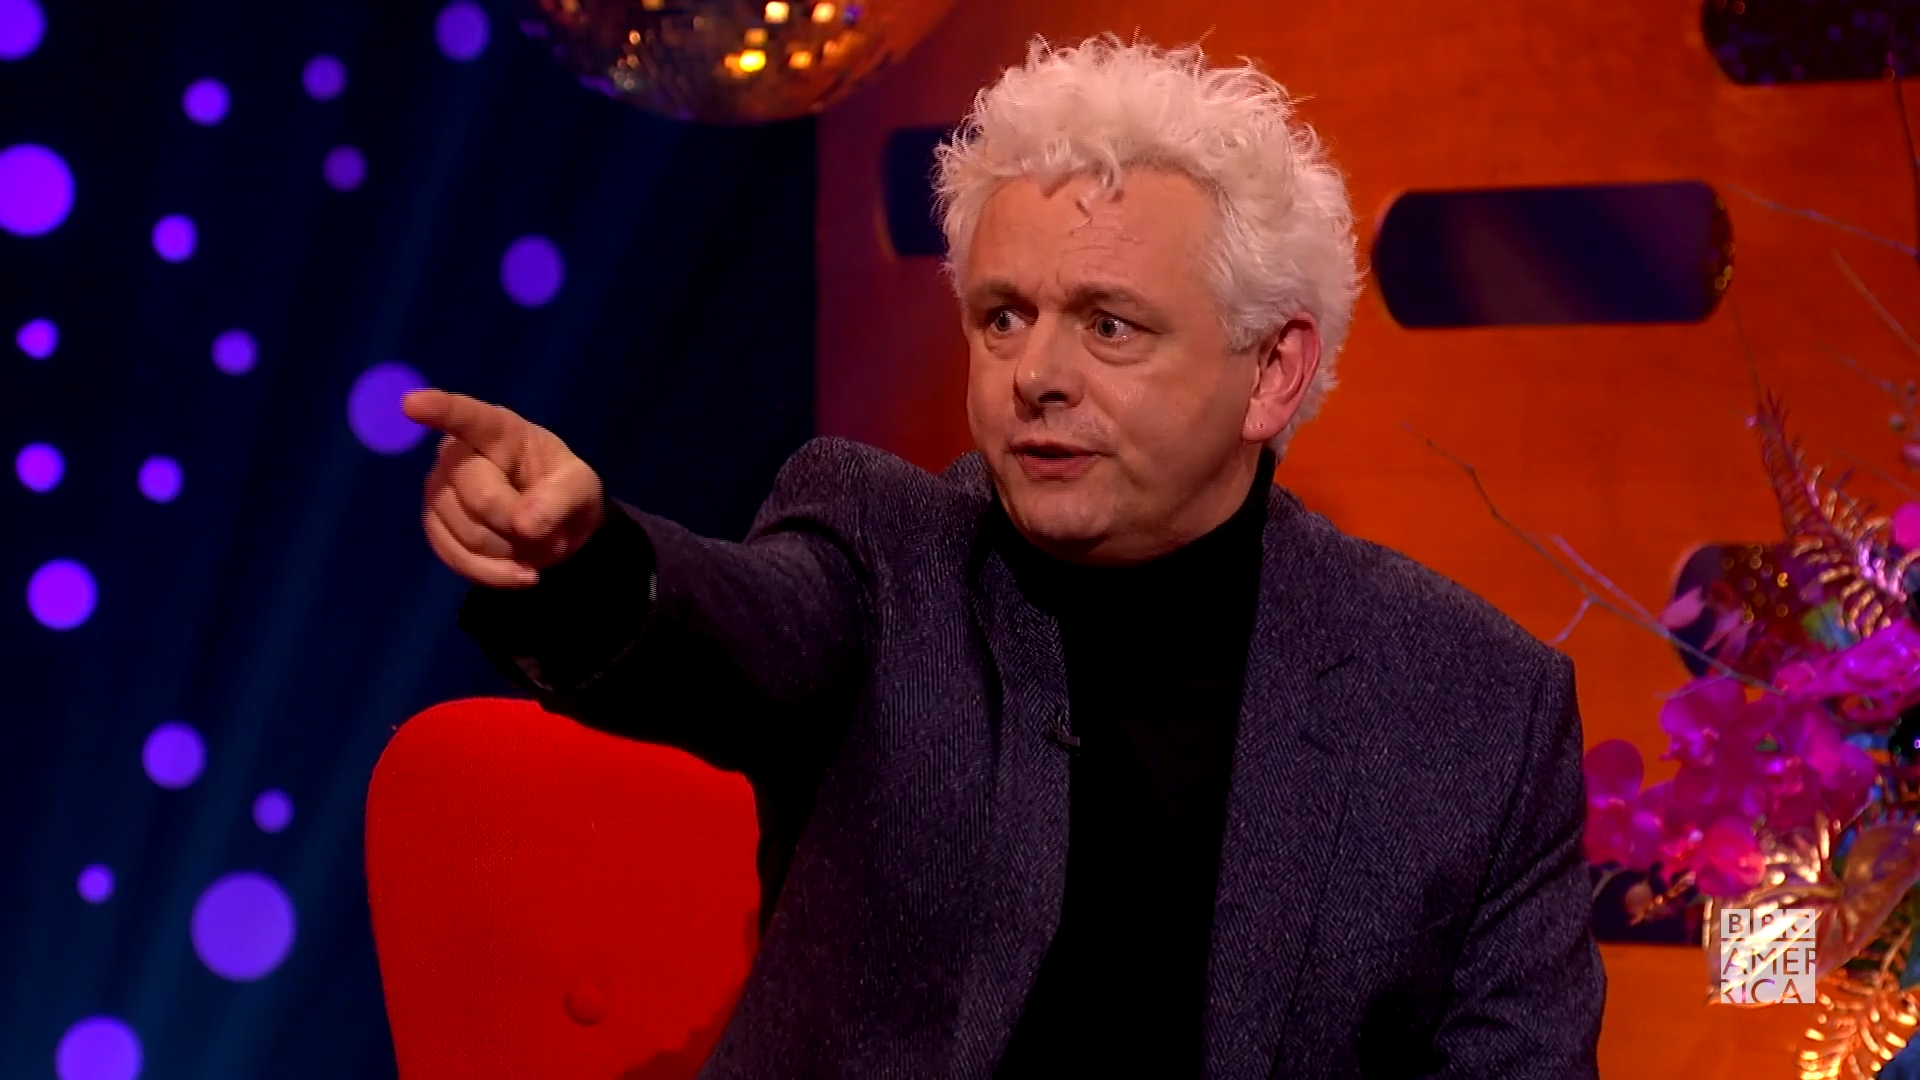 Watch Michael Sheen Playfully Attacked Rowdy Audience Member During ‘Hamlet’ | The Graham Norton Show Video Extras